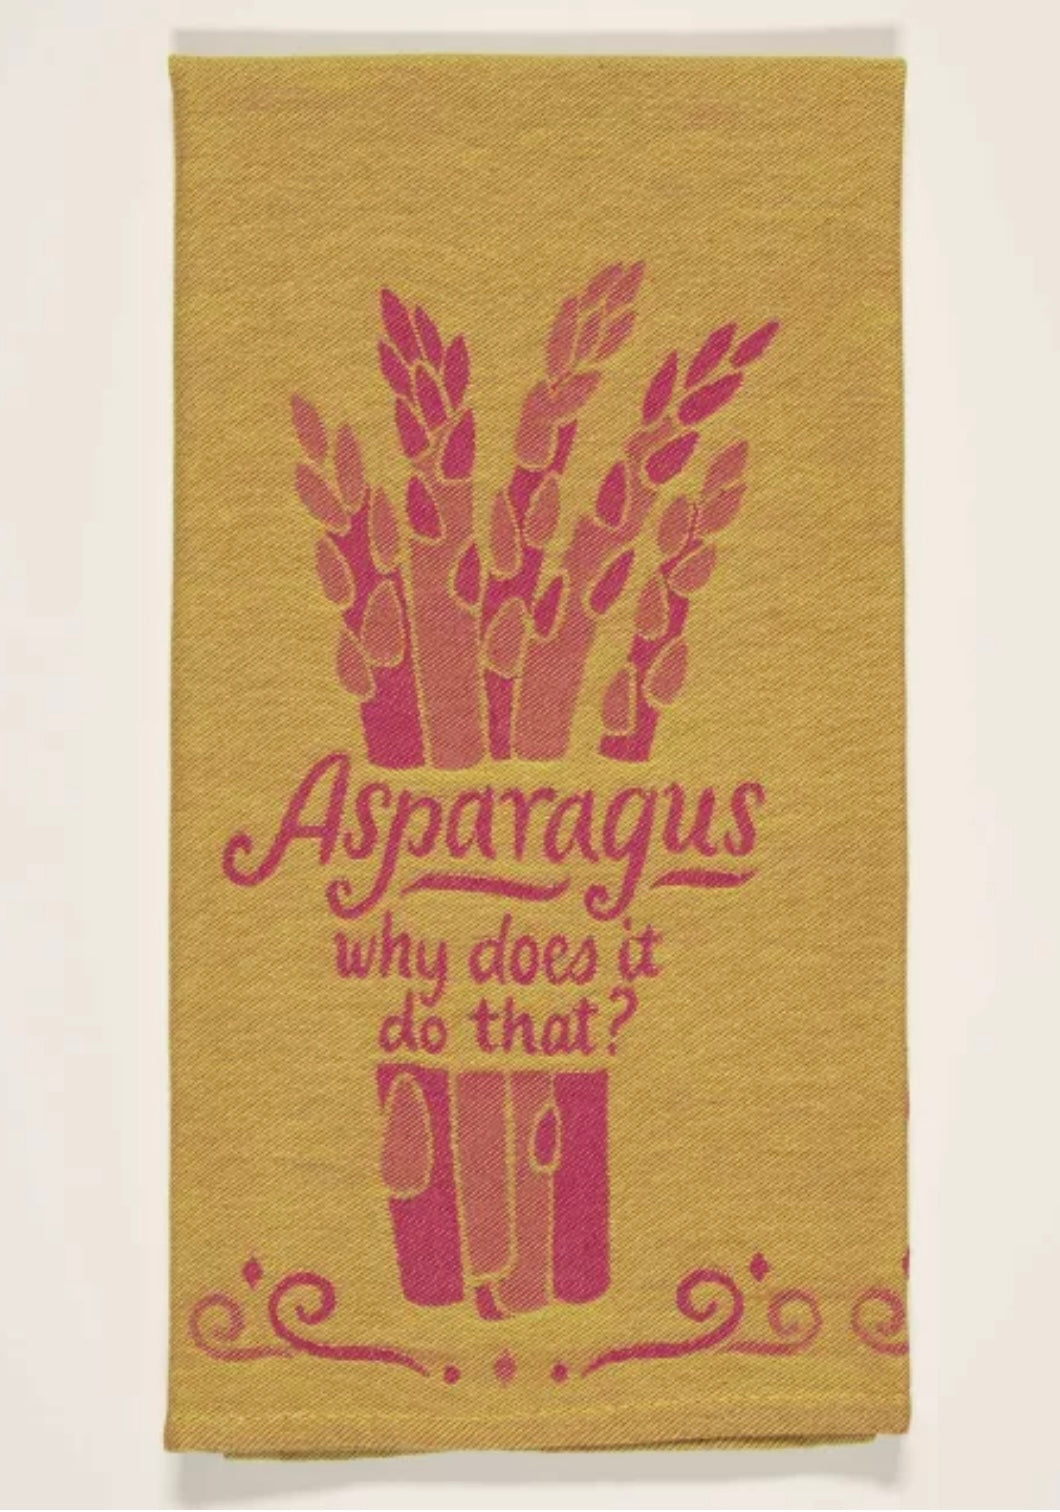 Asparagus. Why Does it Do That Funny Cotton Woven Jacquard Dish Towel Blue Q Socks